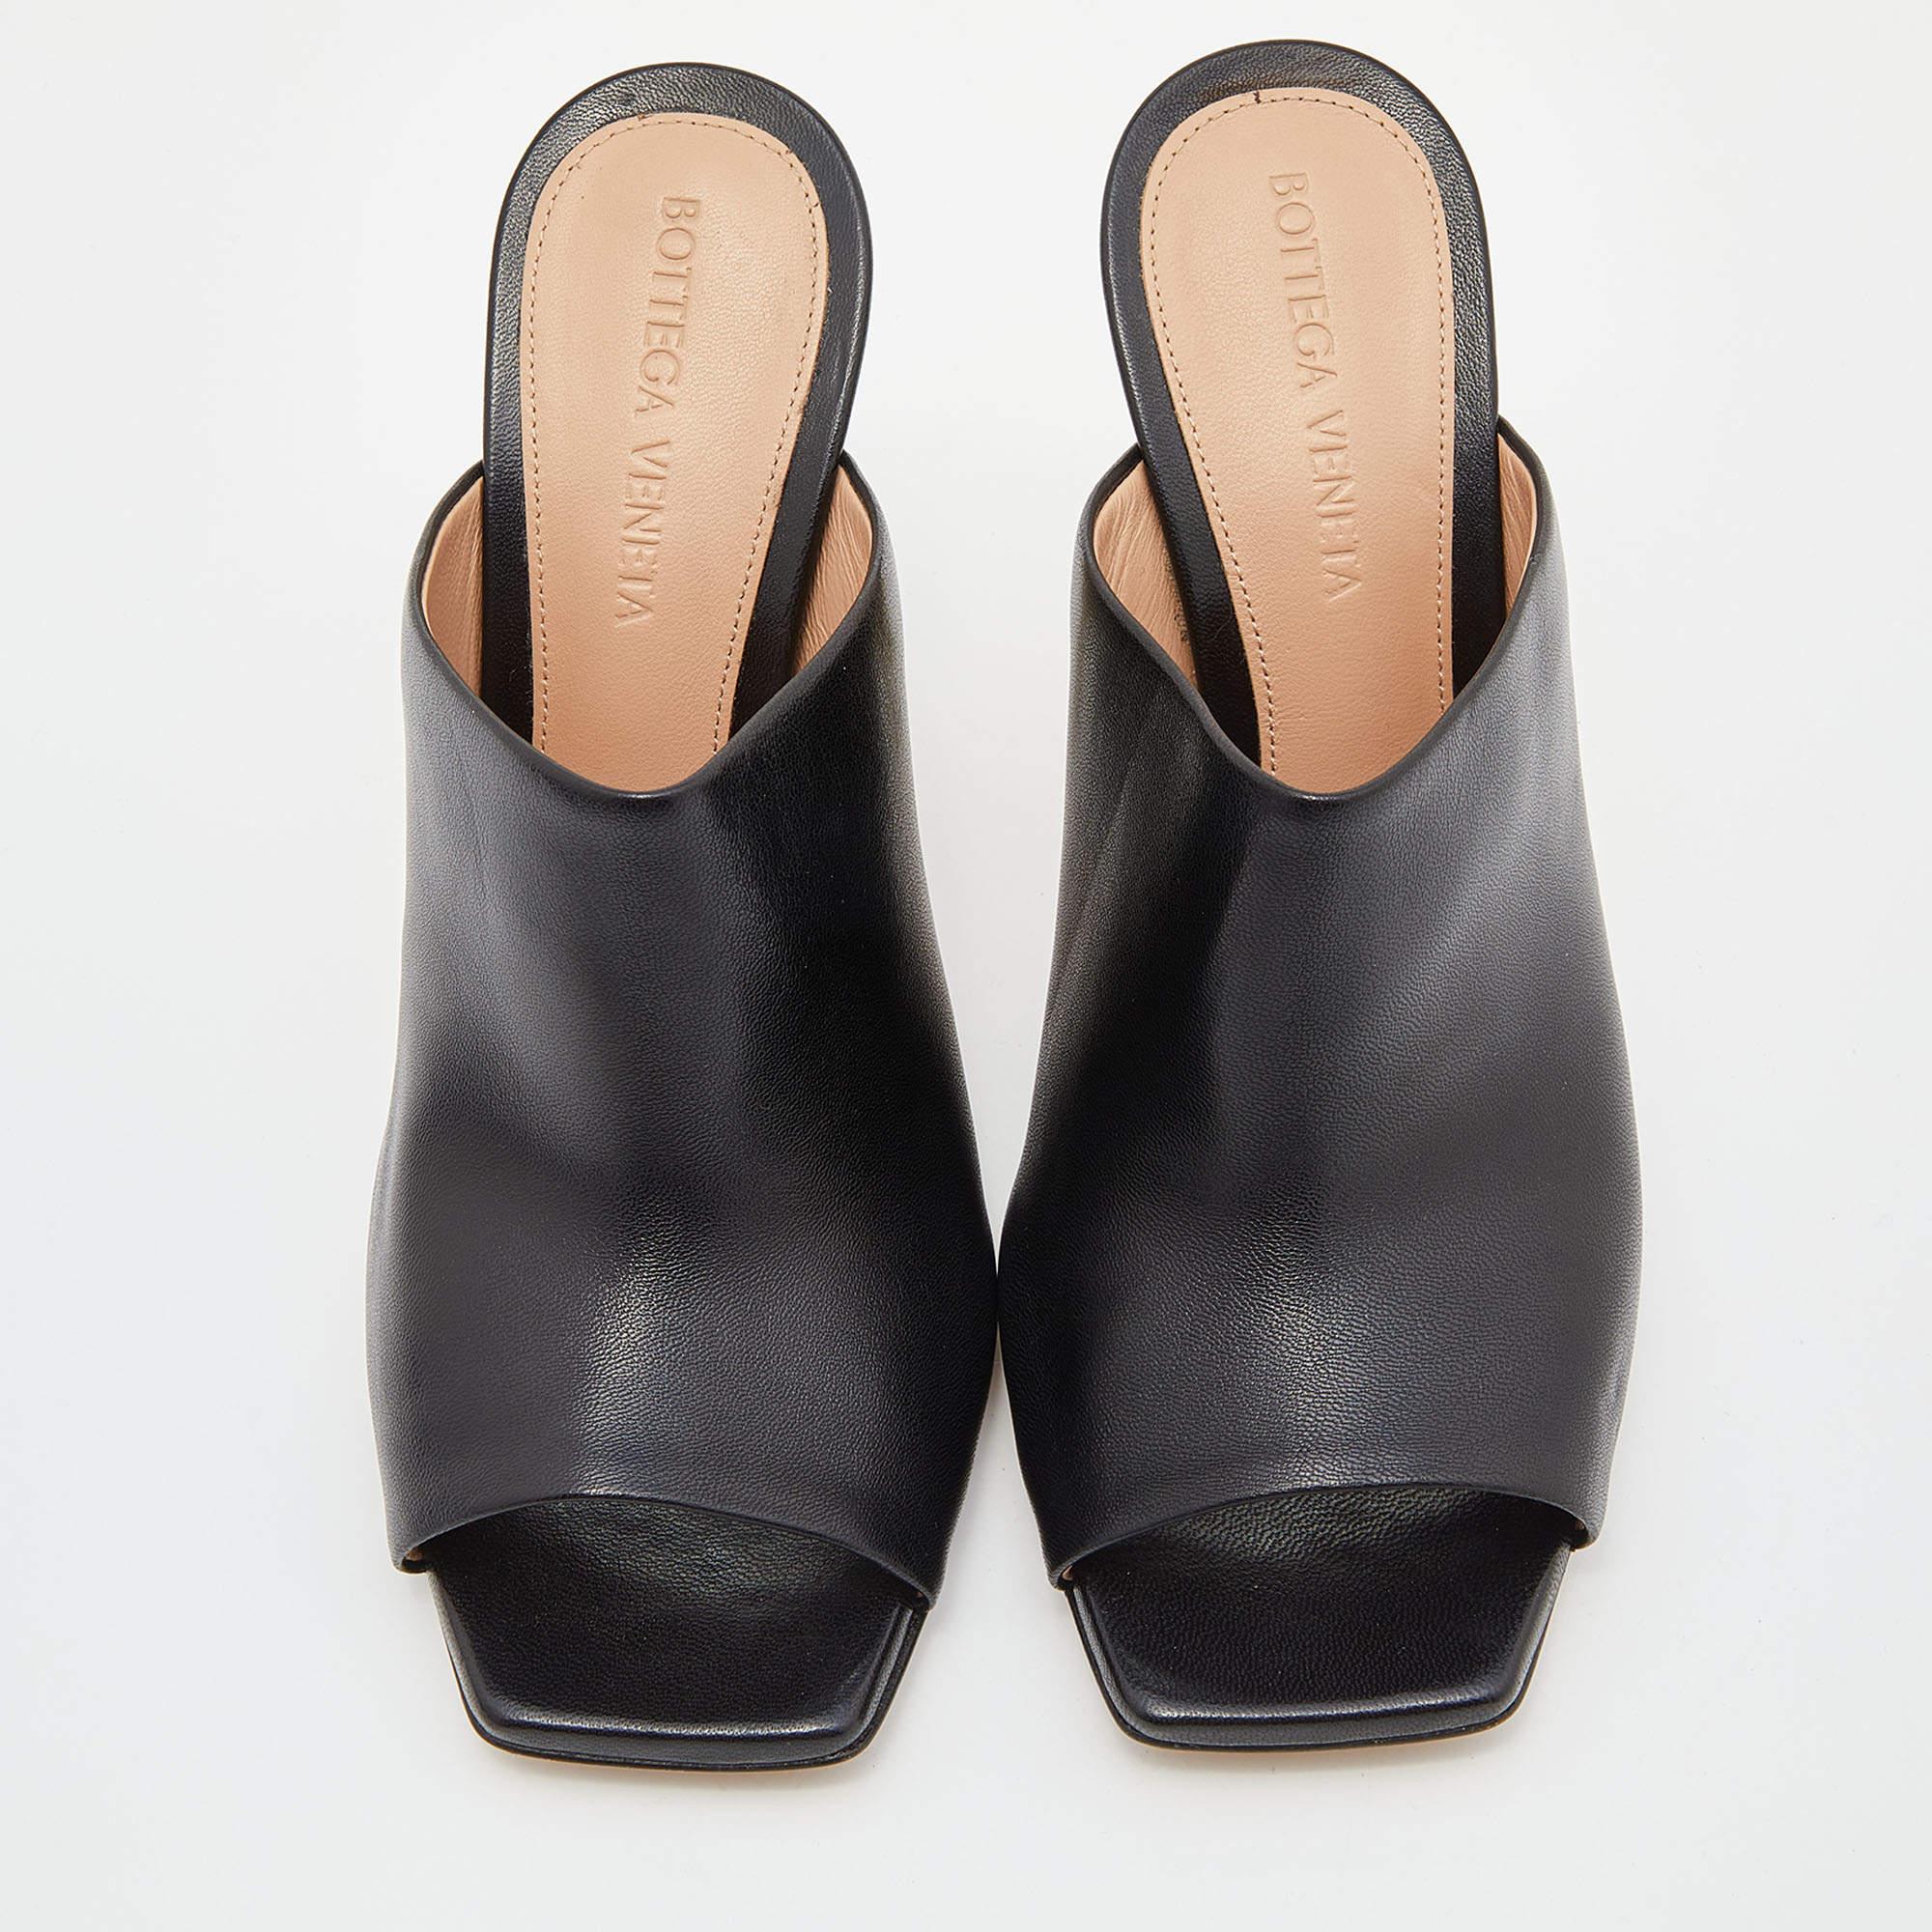 Create effortless styles with these Bottega Veneta mules. Made of quality materials, they are designed to elevate your OOTD and keep you in comfort all day long.

